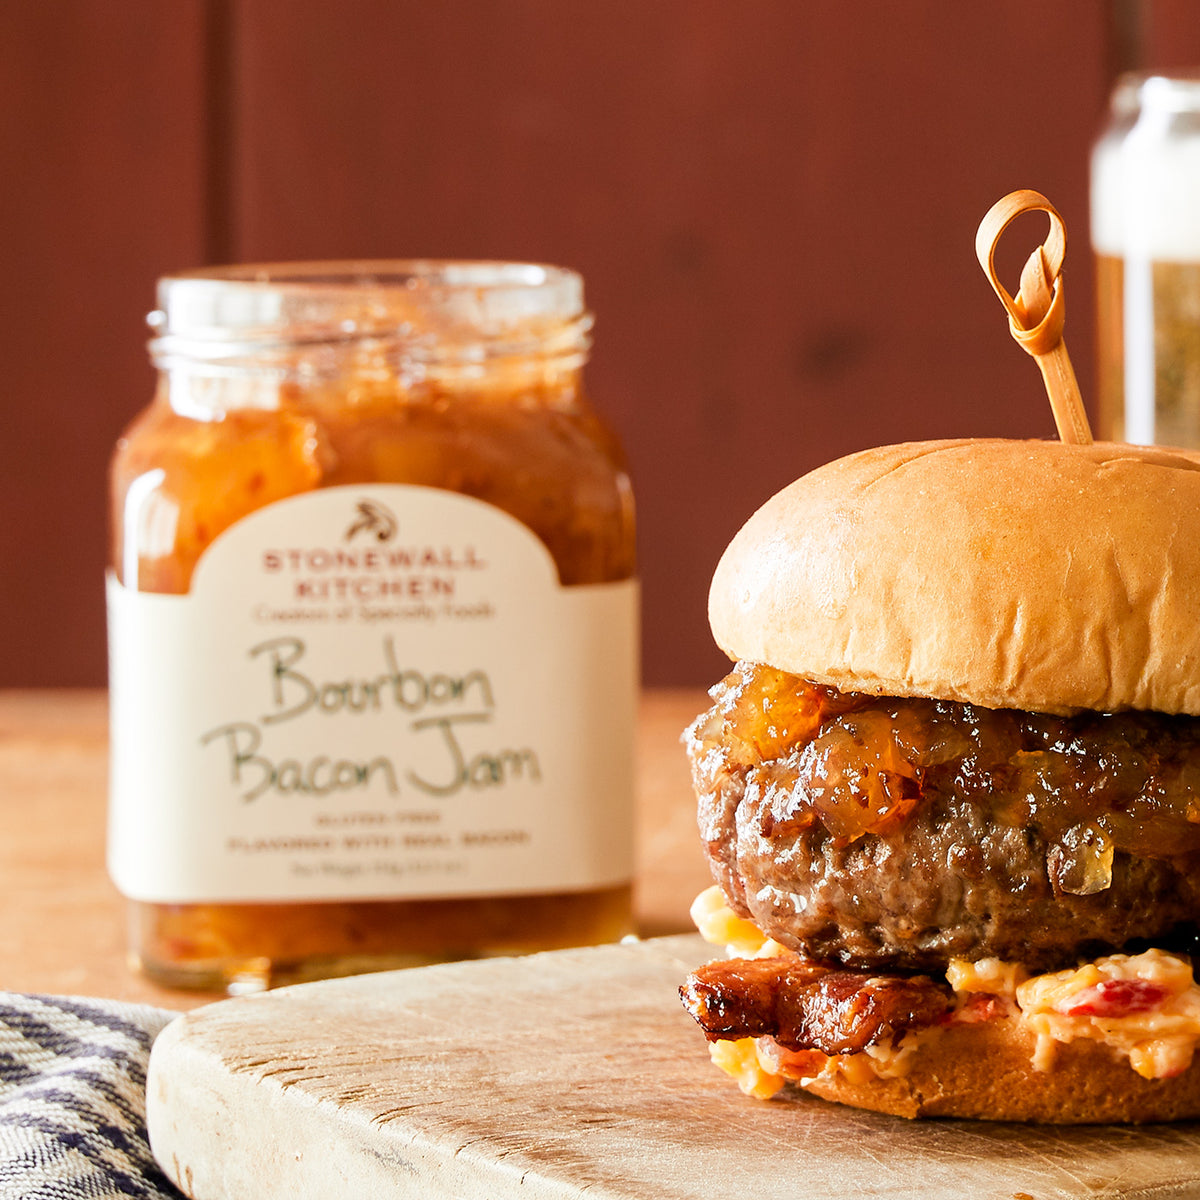 Juicy bacon cheeseburger with Stonewall Kitchen Bourbon Bacon jam spread on top